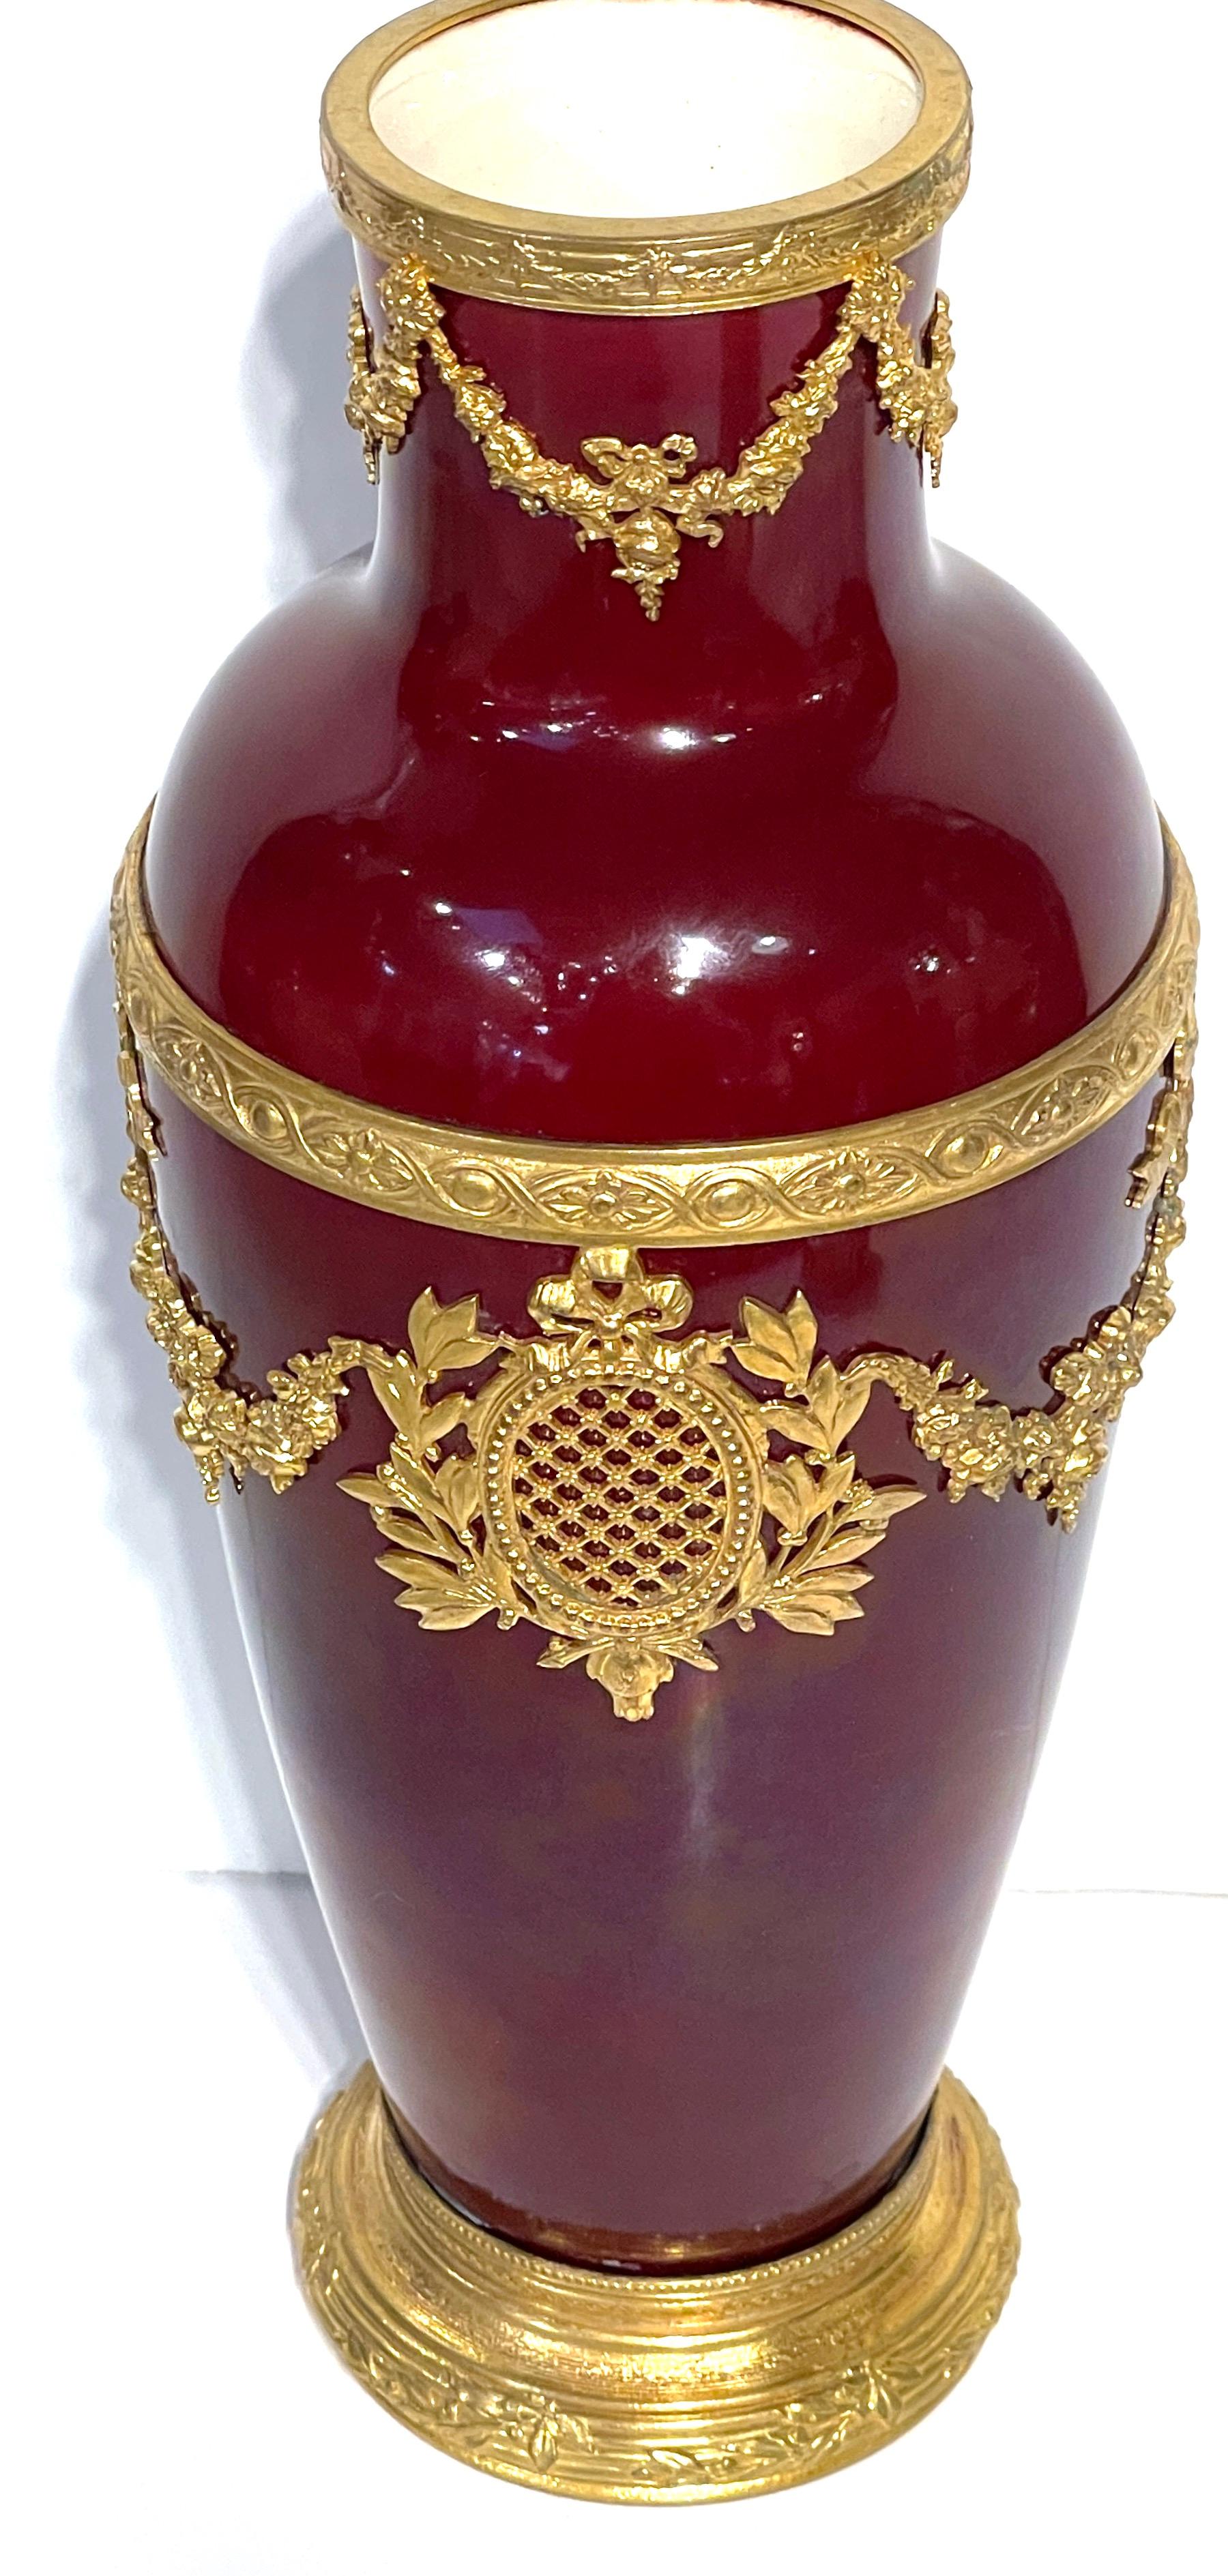 Paul Milet for Sevres Red Flambe Ormolu Mounted Neoclassical Vase  For Sale 1